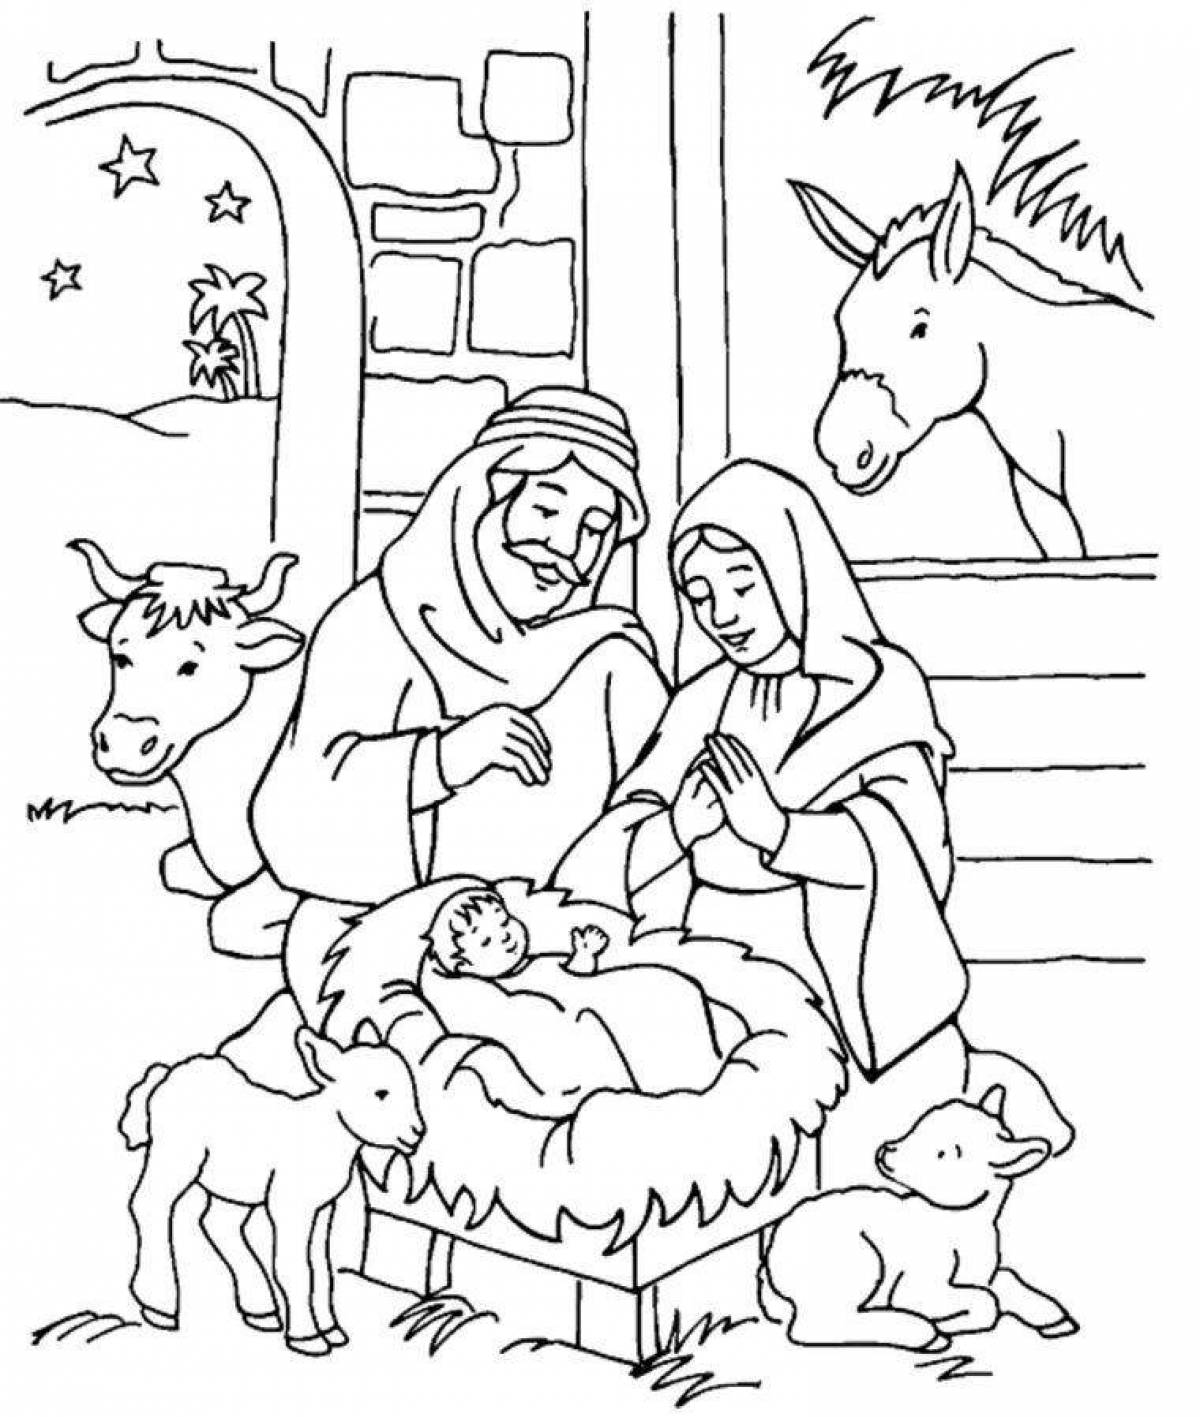 Exciting Christmas coloring book for kids orthodoxy